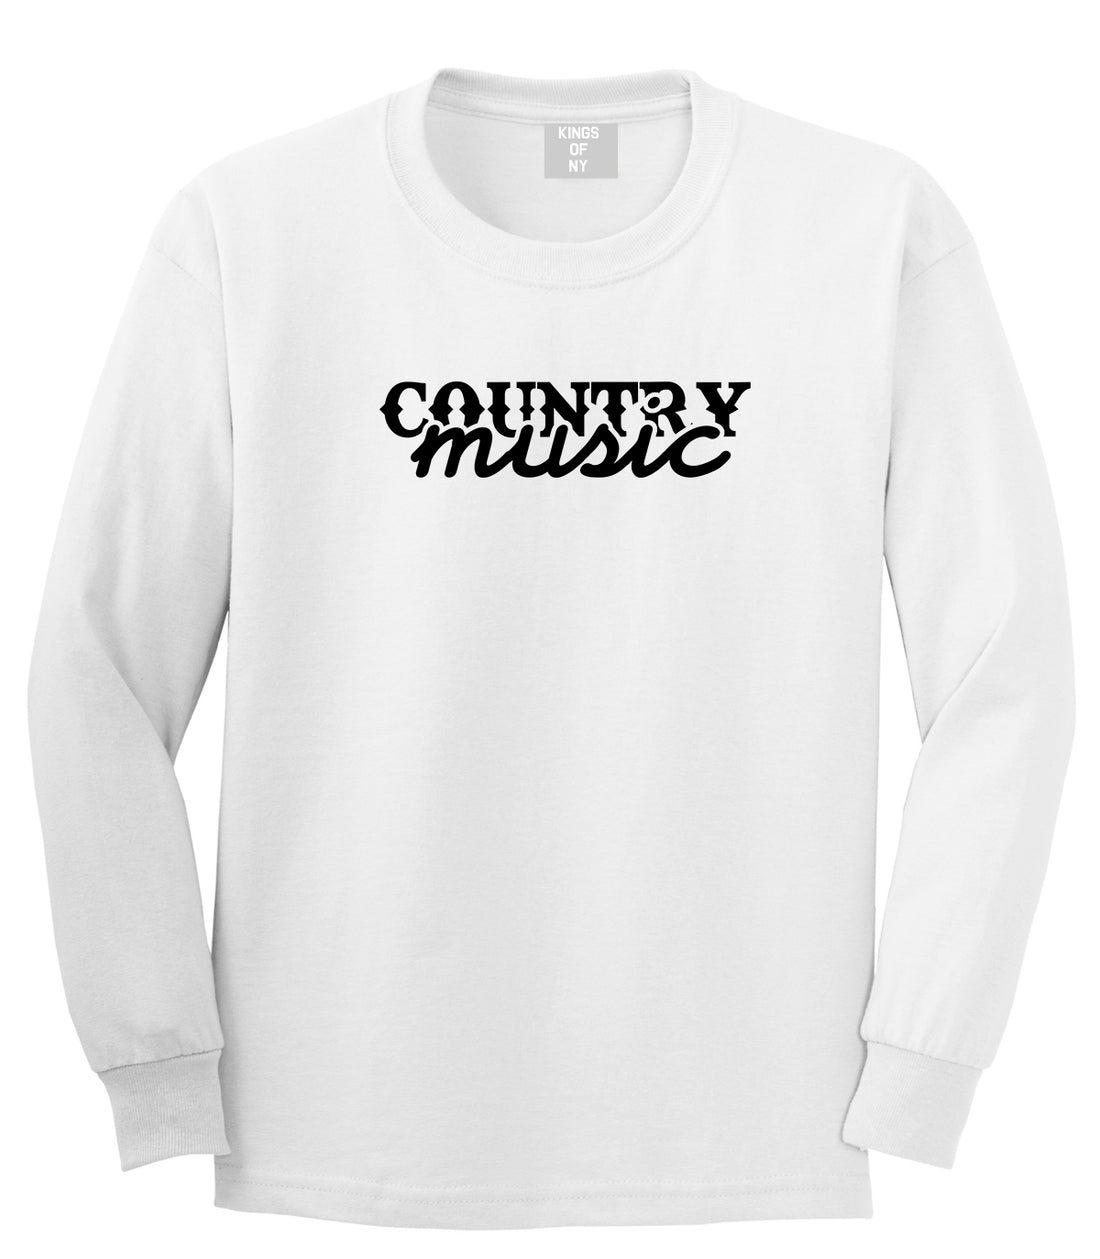 Country Music White Long Sleeve T-Shirt by Kings Of NY